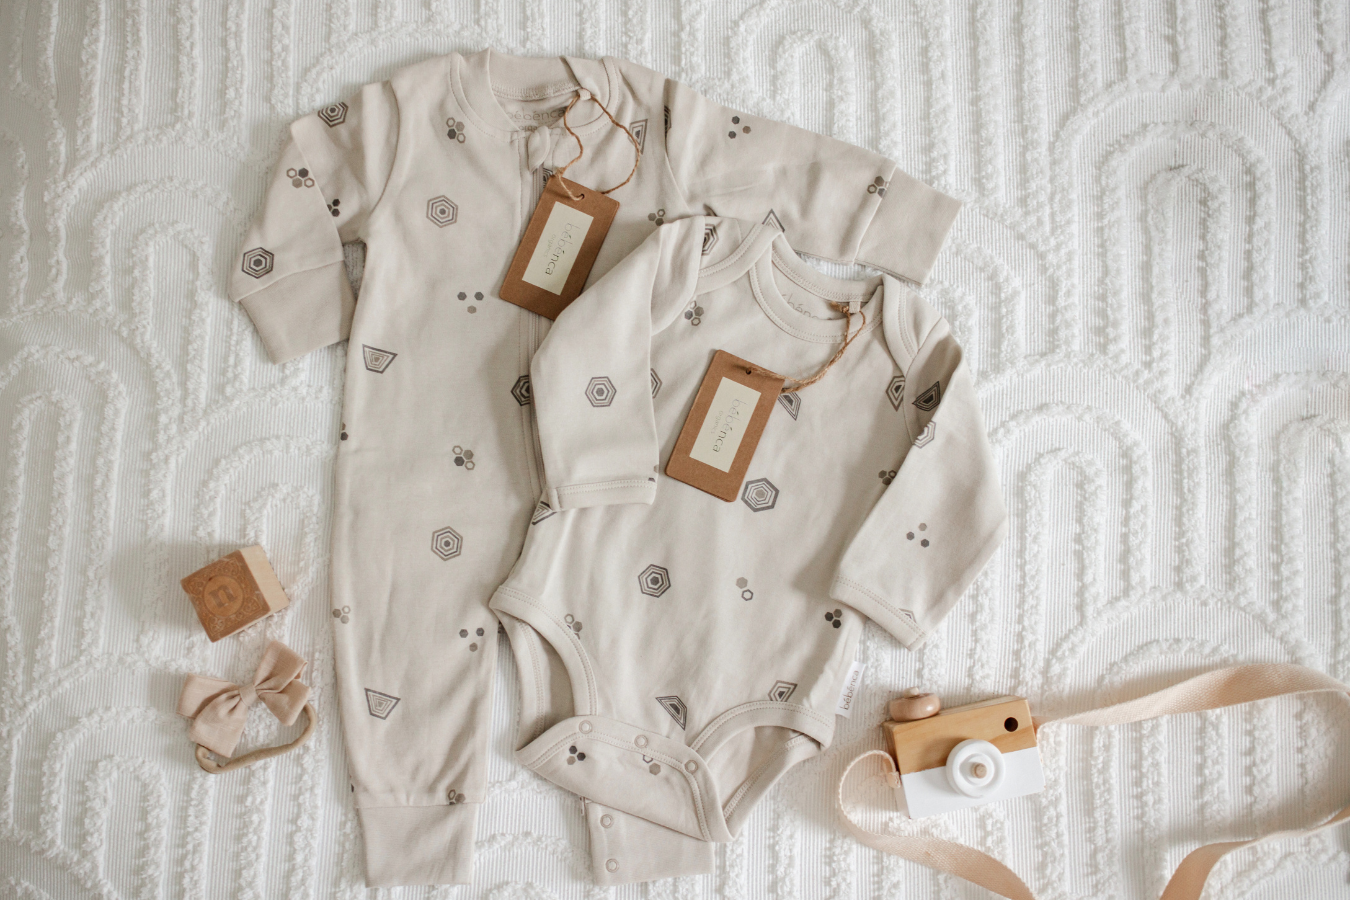 How to make baby clothing last long